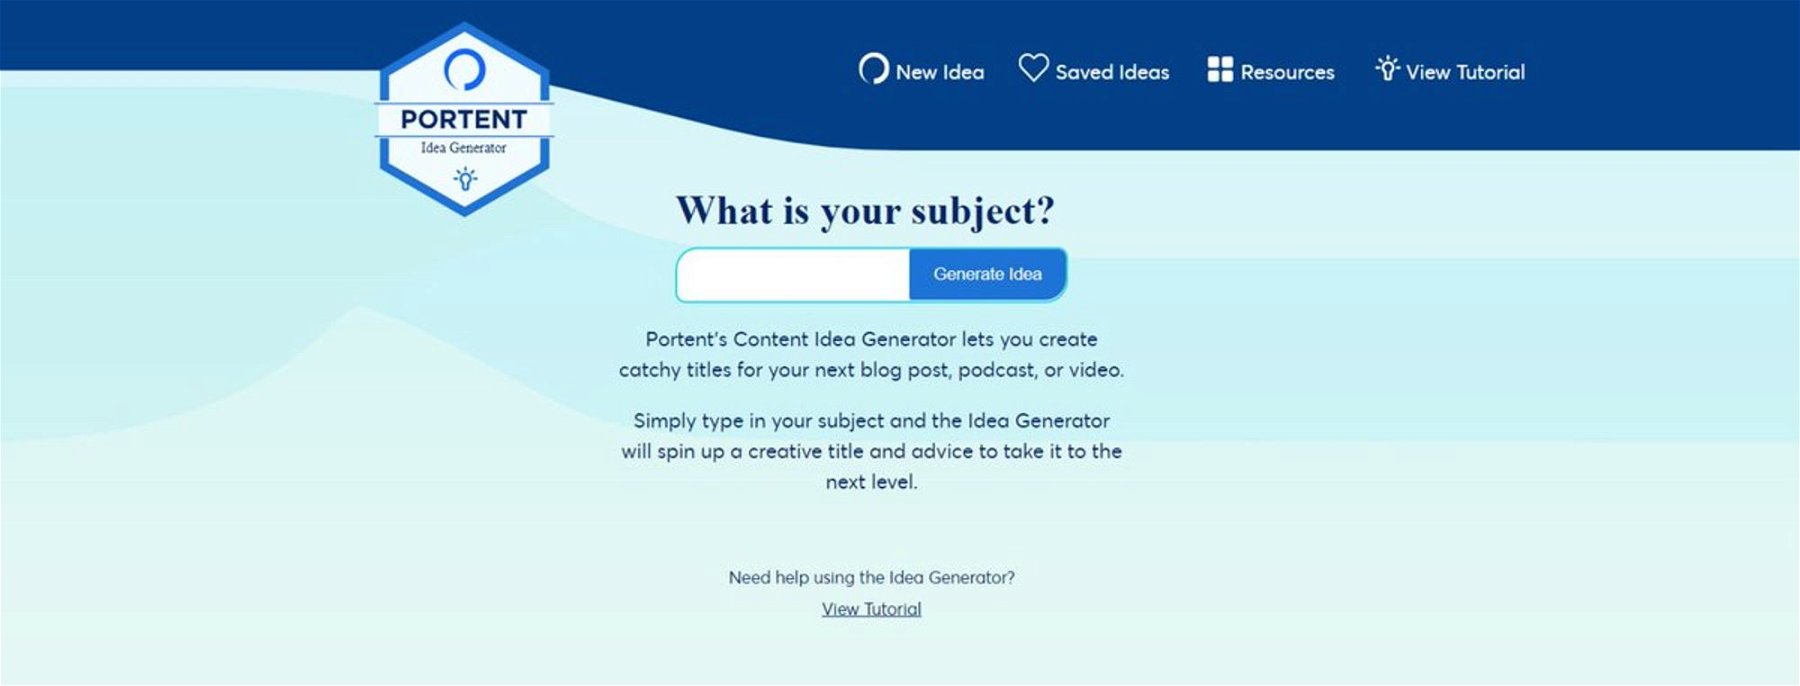 Portent Content Idea Generator displaying its search bar on the homepage.